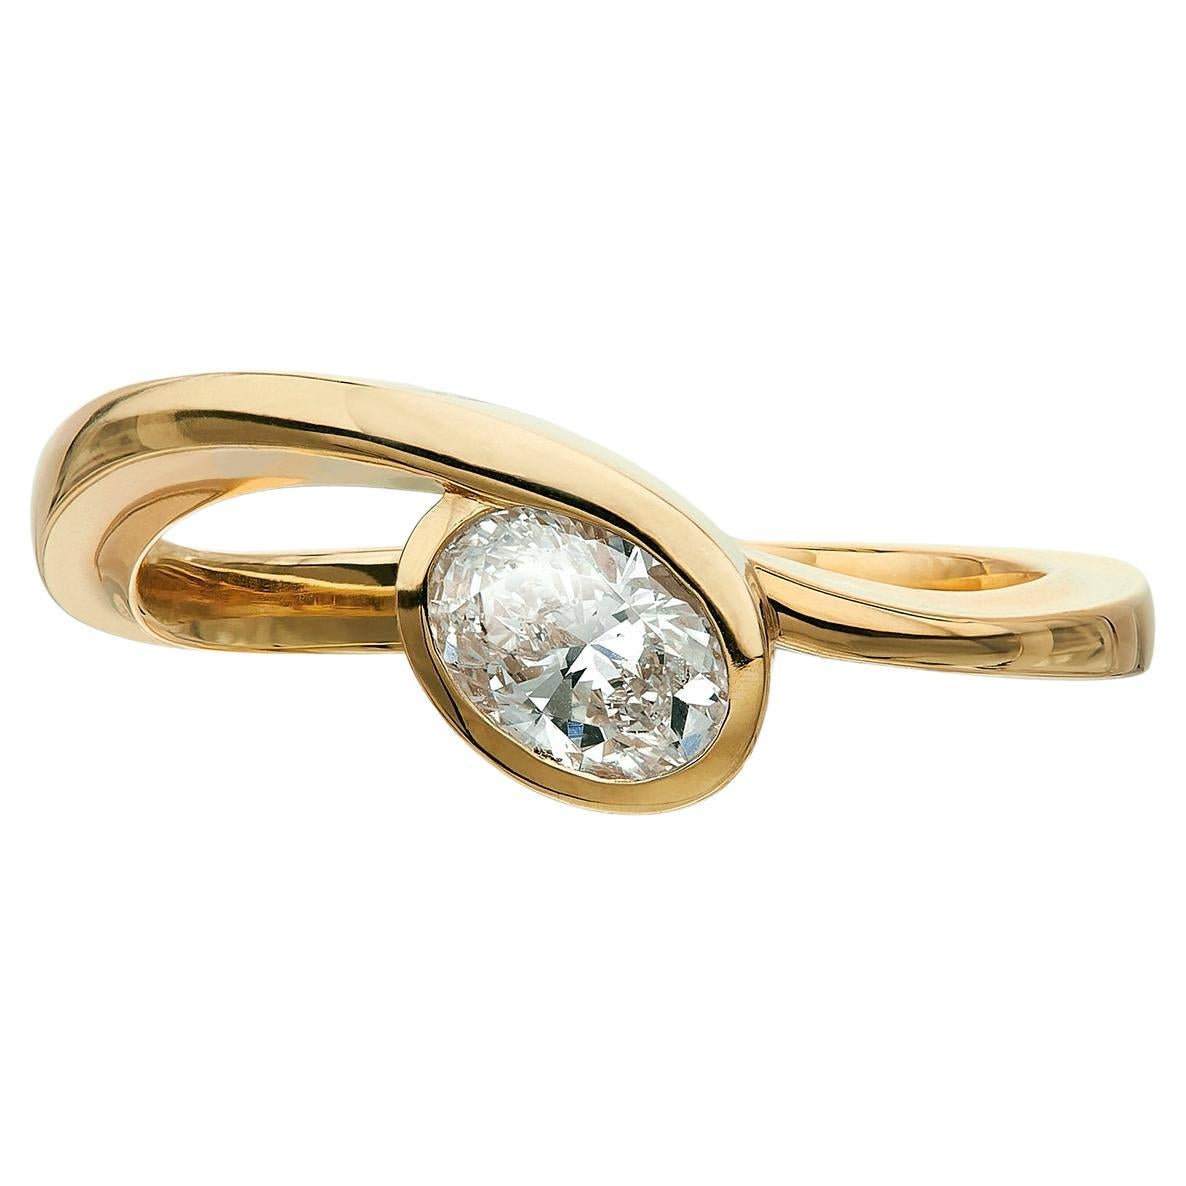 Handcrafted Diamond Solitaire ring - 18K yellow gold